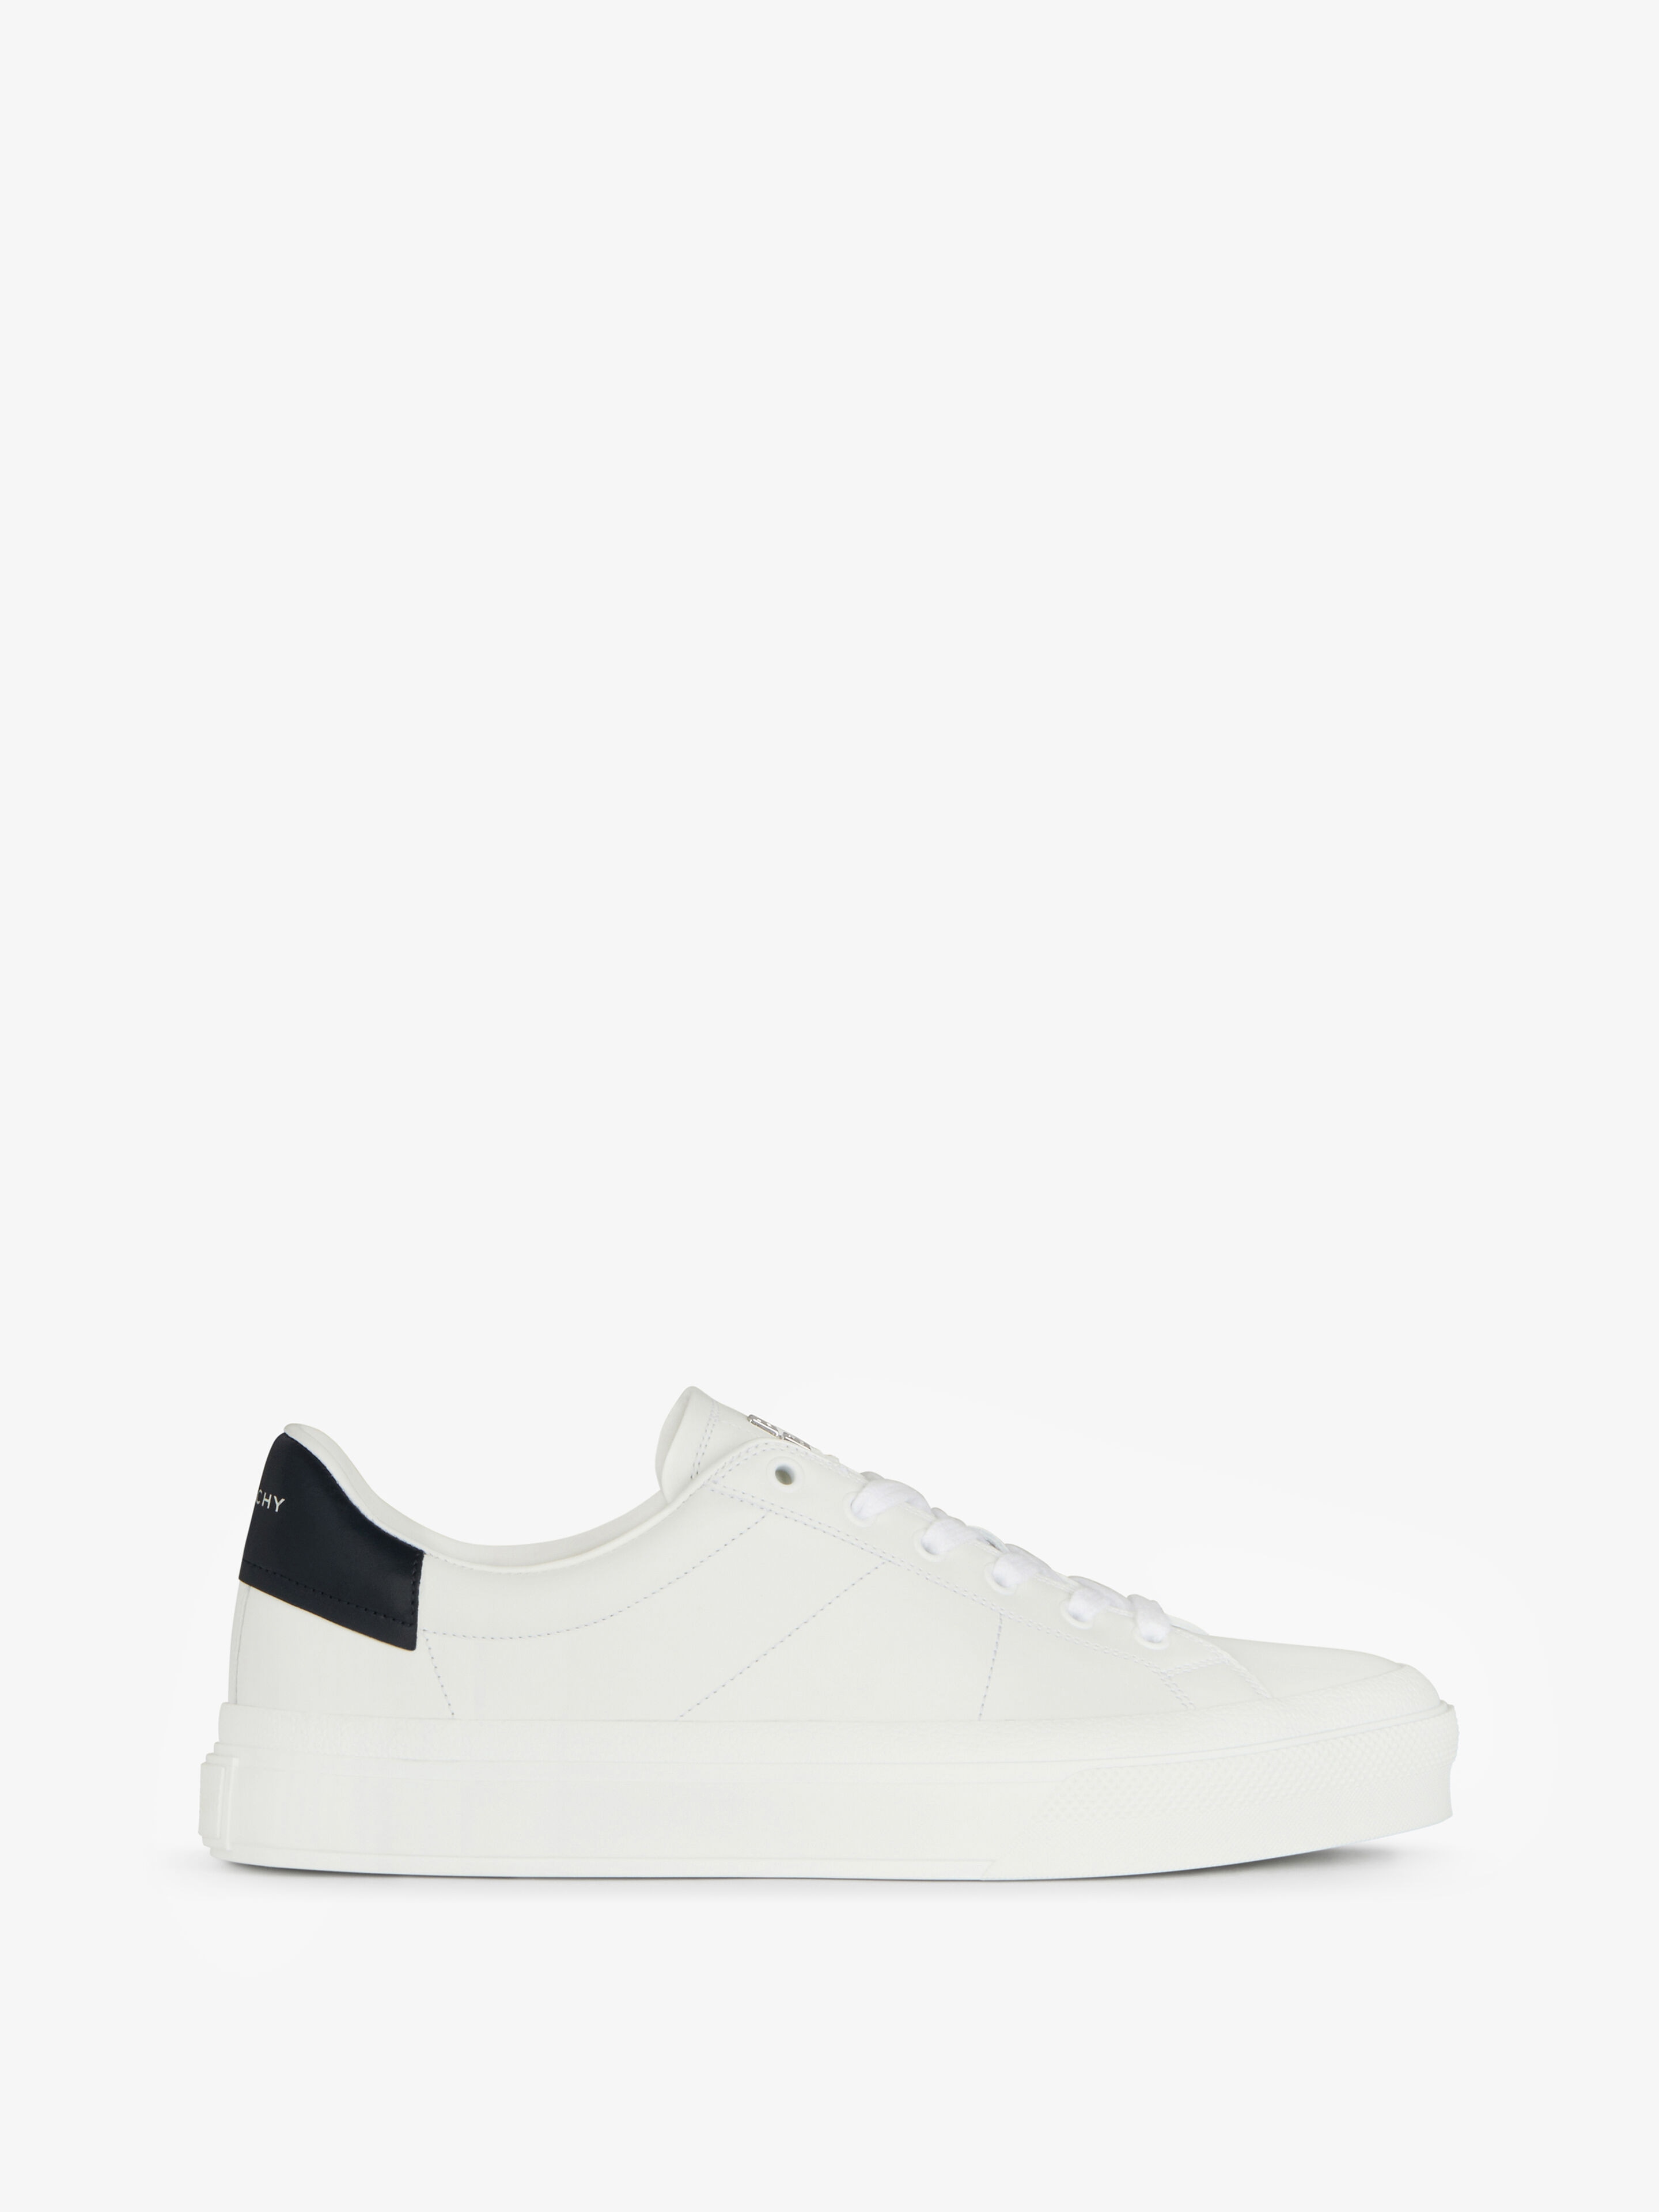 givenchy slip on shoes